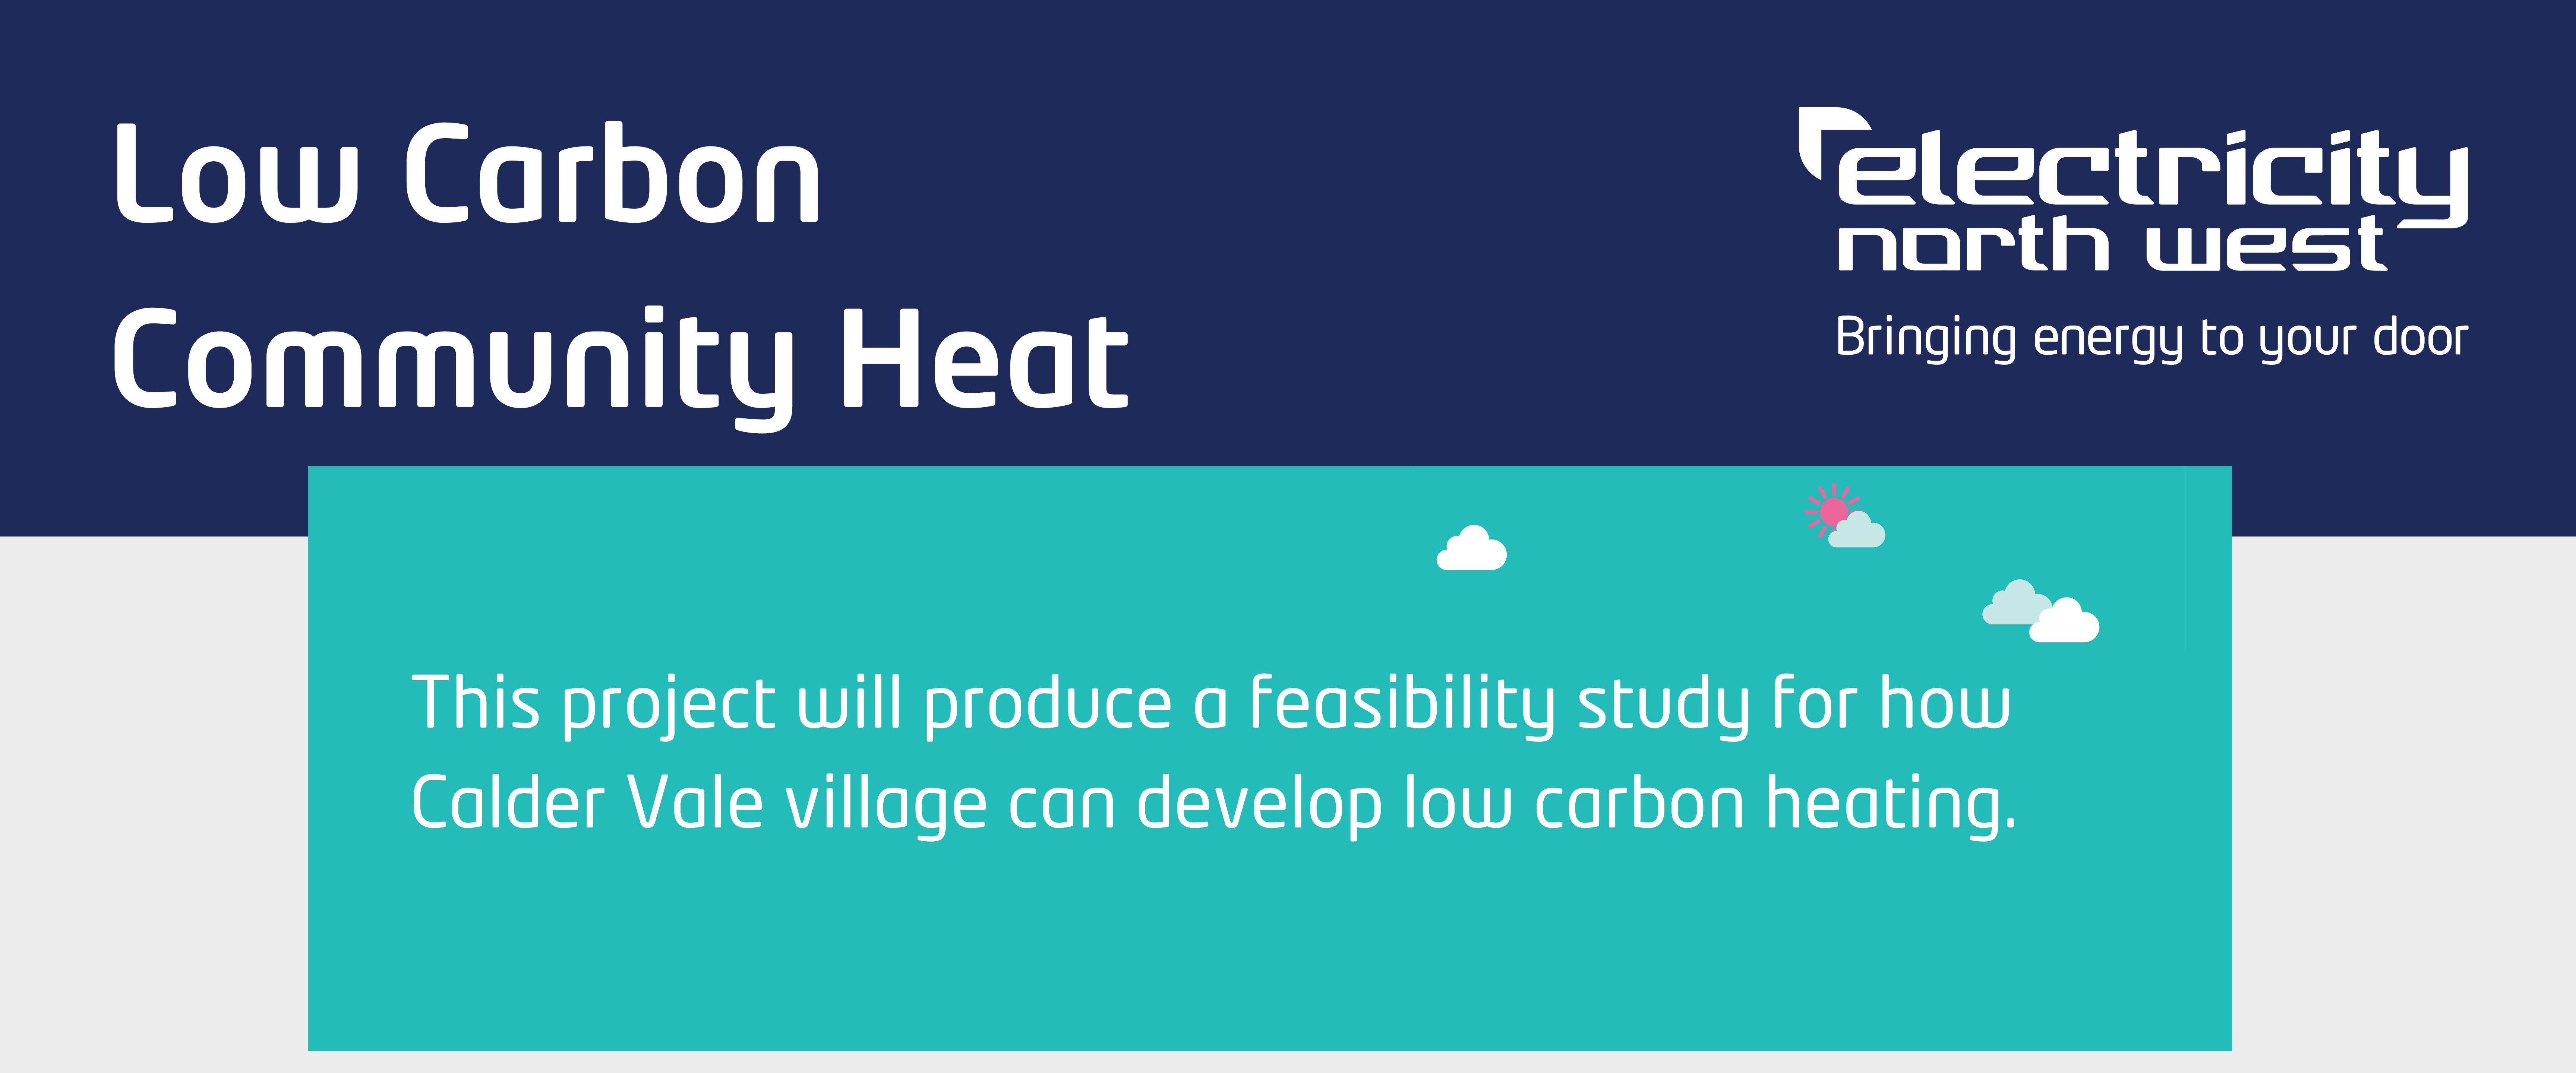 Low Carbon Community Heat, This project will produce a feasibility study for how Calder Vale village can develop low carbon heating.
